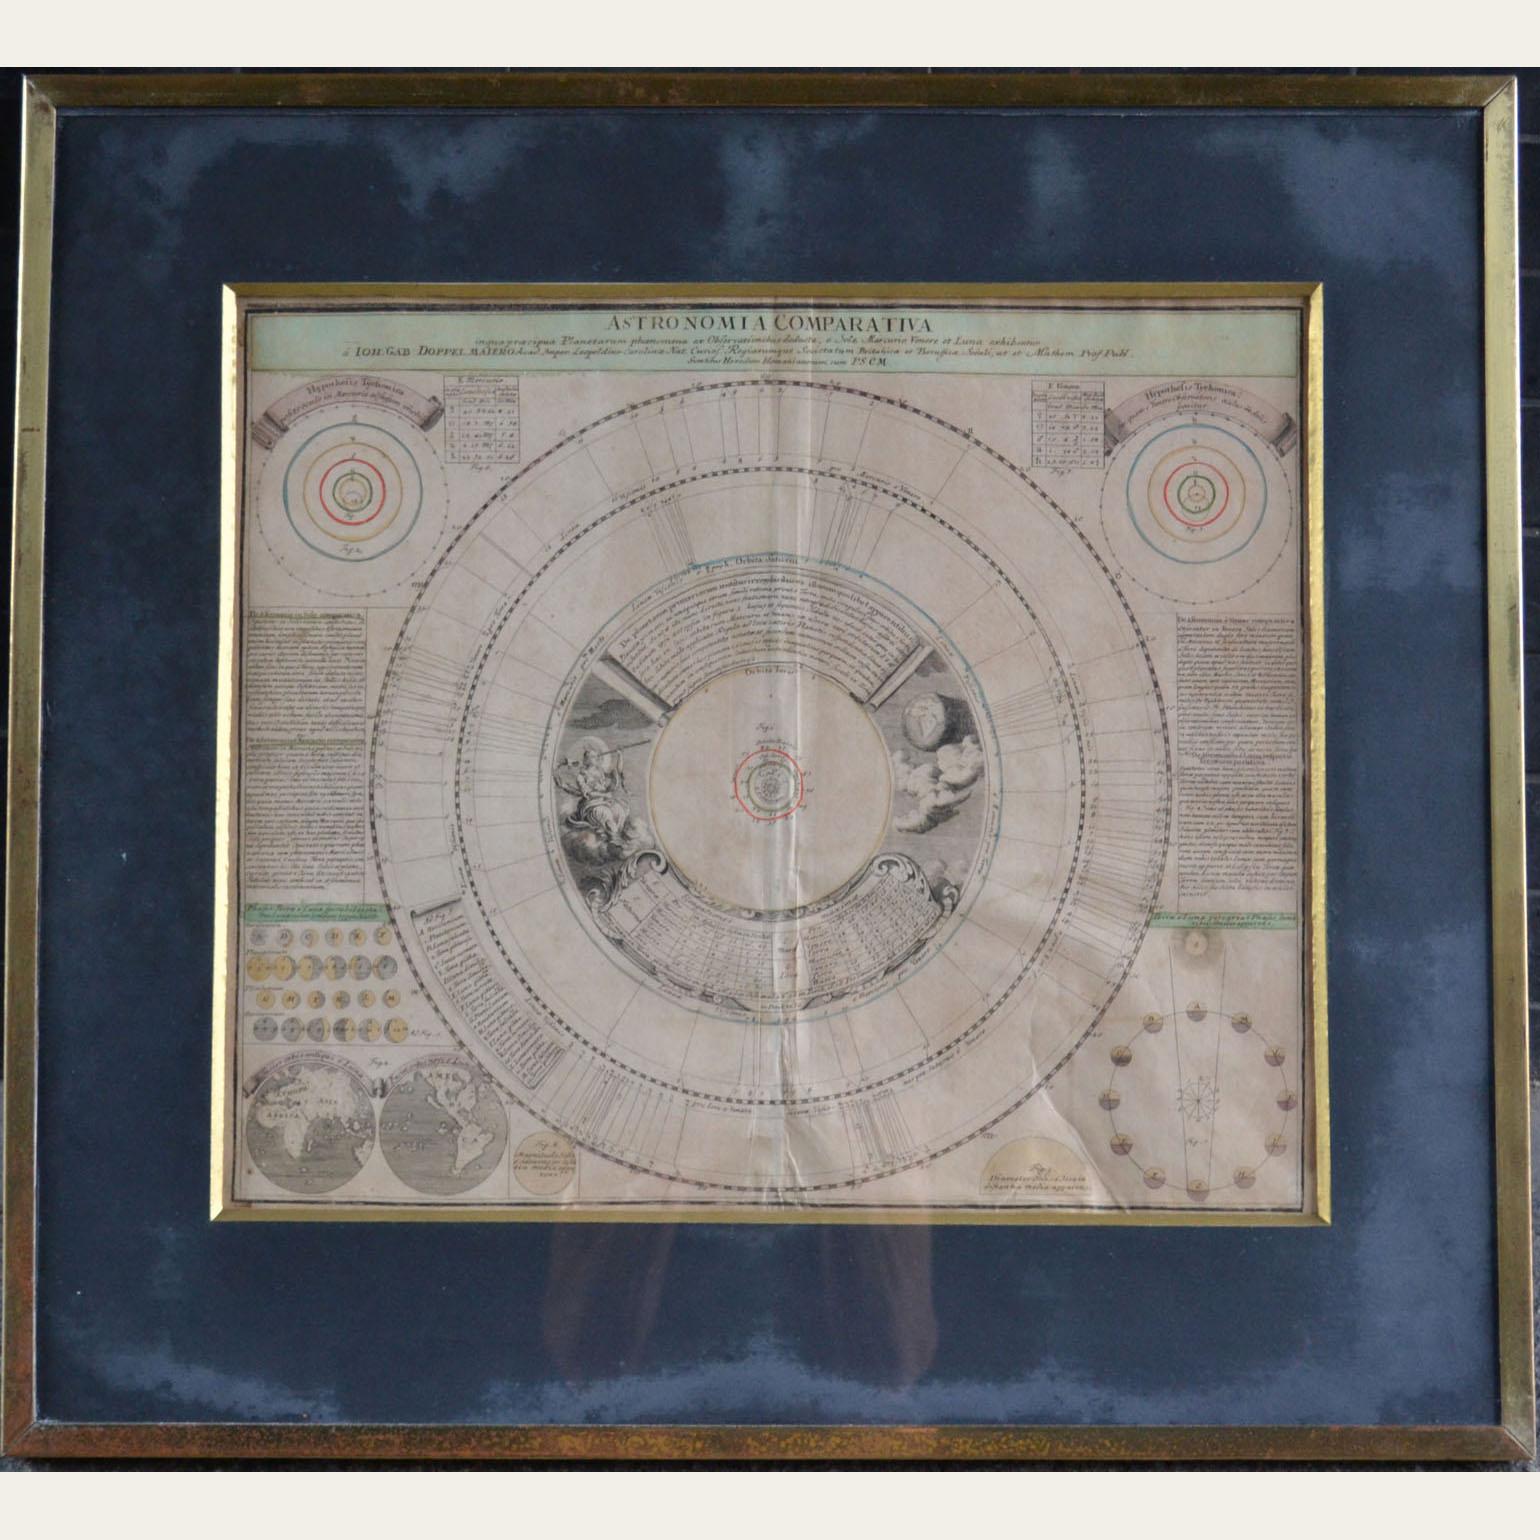 Set of four original 18th century copper-engraving of celestial charts etchings issued by Homann. Doppelmayr is the cartographer, astronomer and mathematician. He held the post of Professor of Mathematics at the Aegidien Gymnasium, Nuremberg from